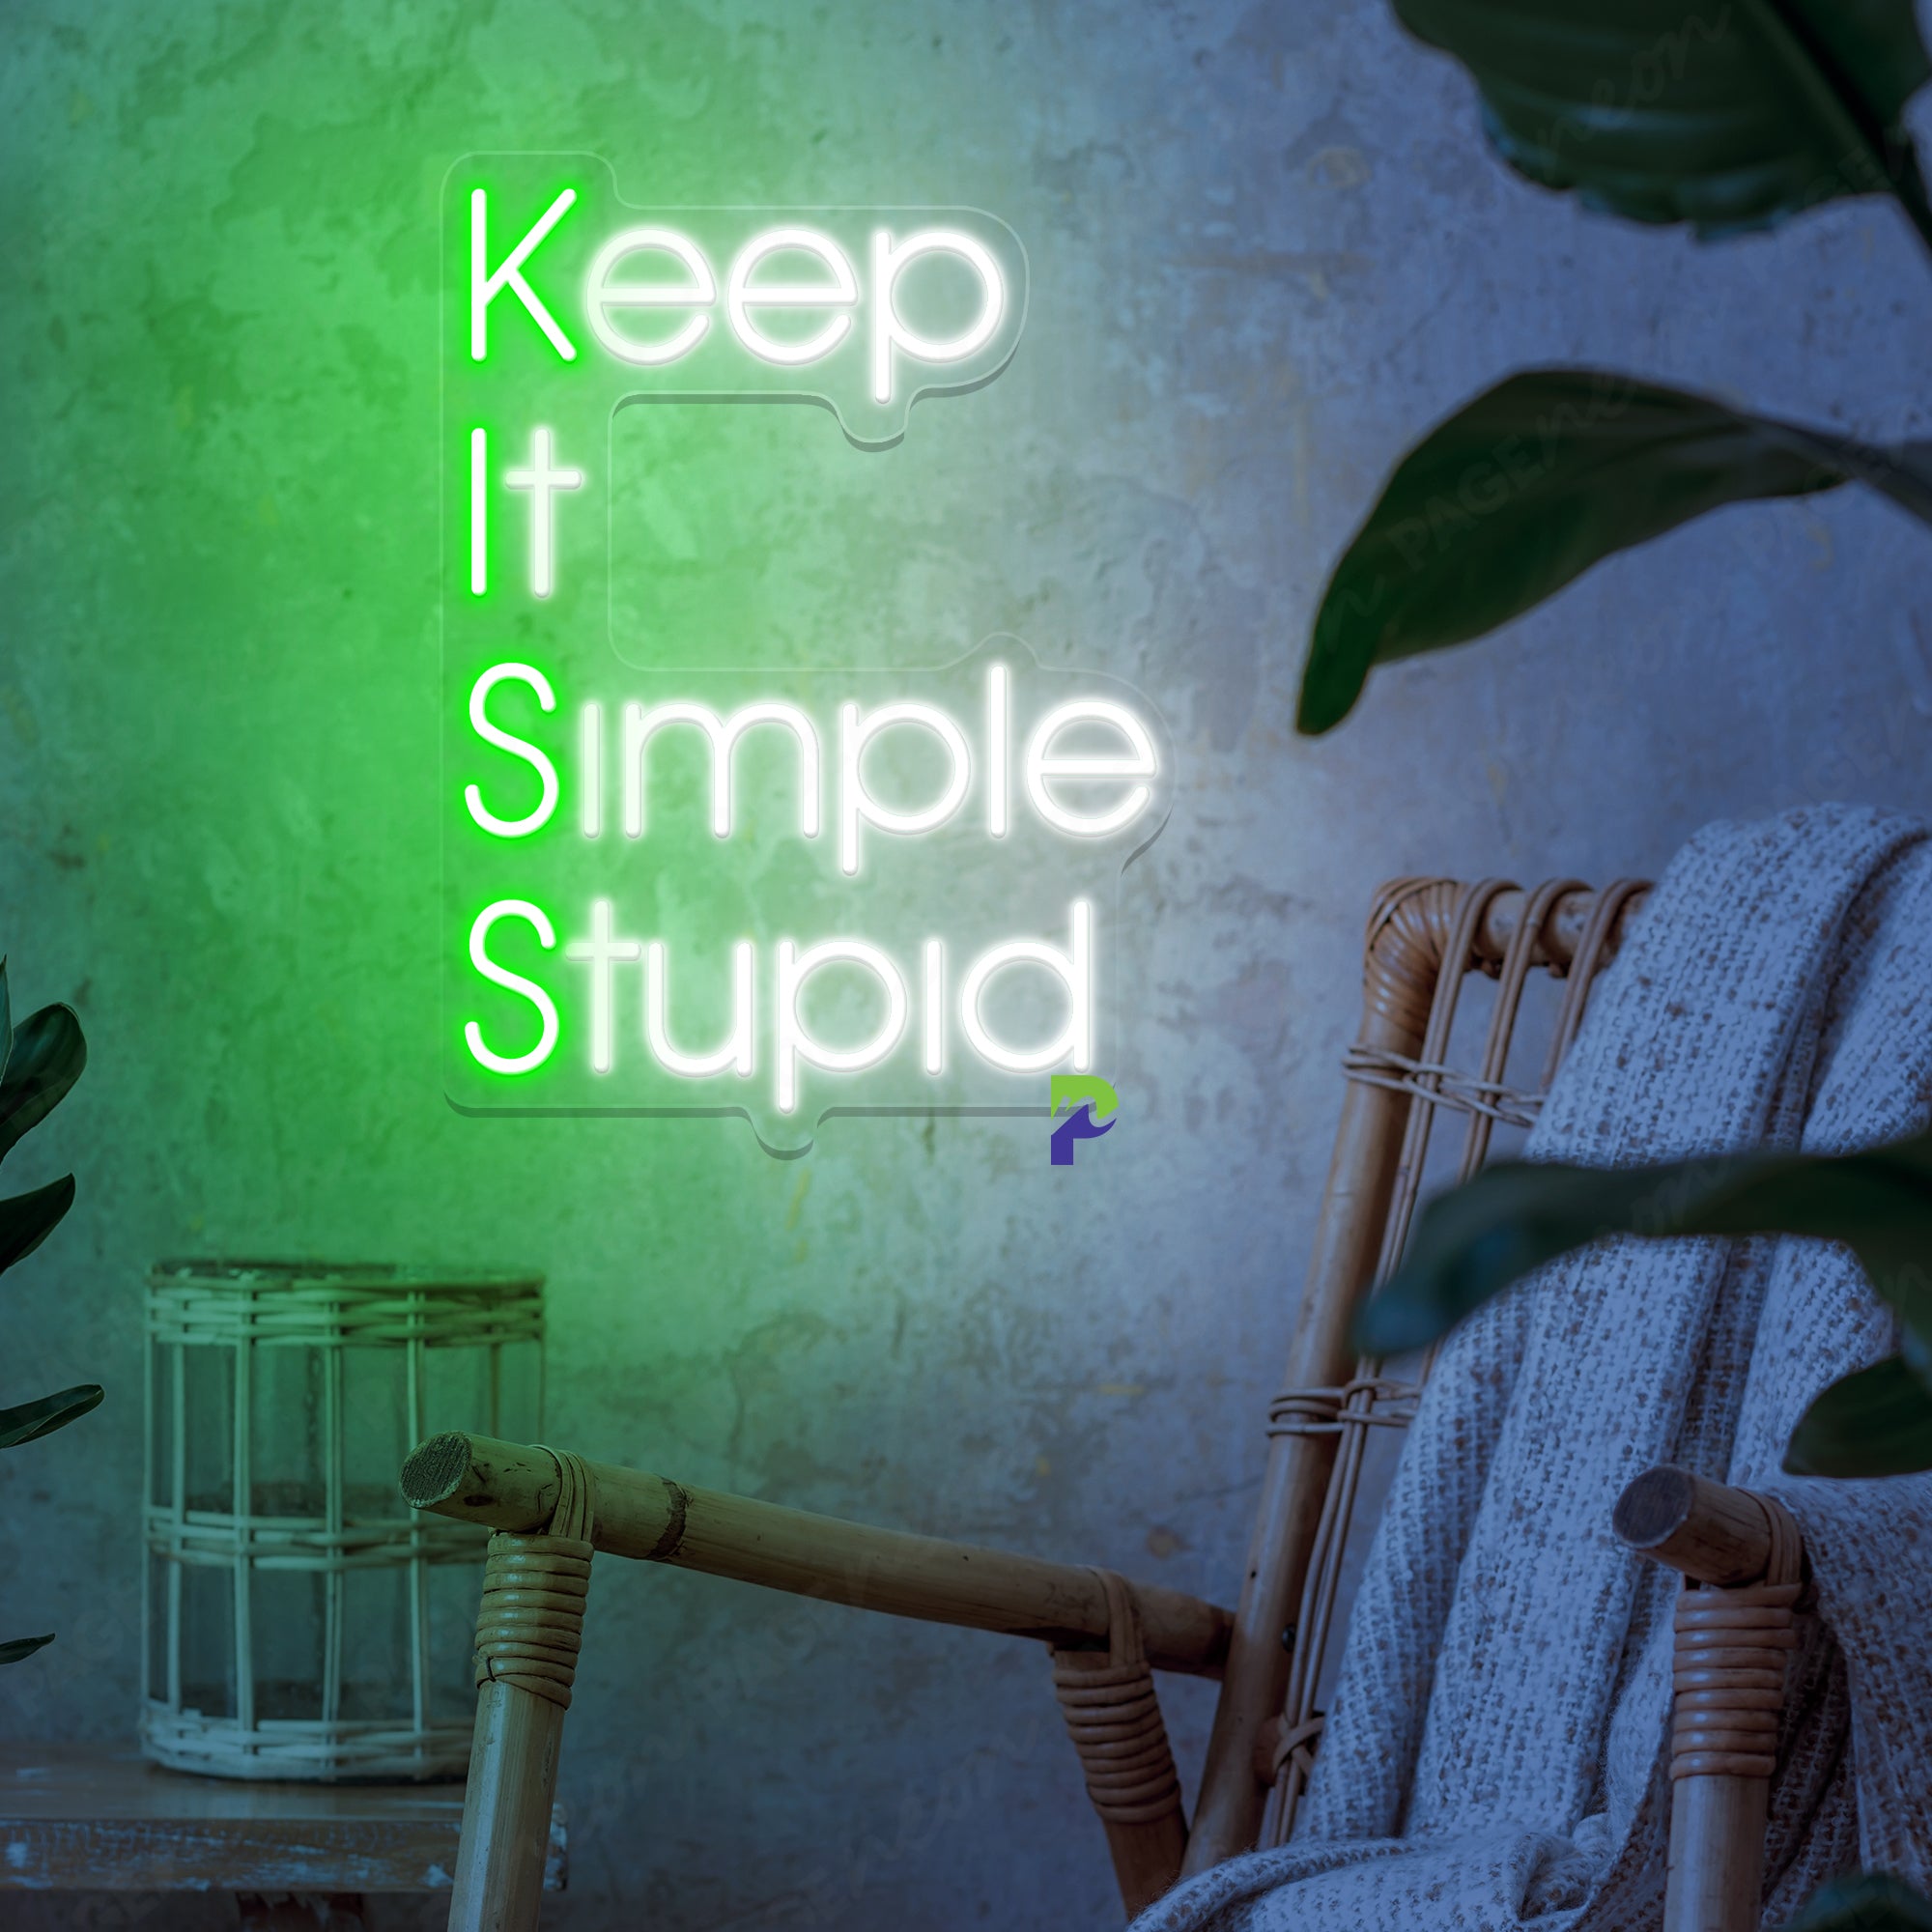 Keep It Simple Stupid Neon Sign Kiss Meaning Led Light